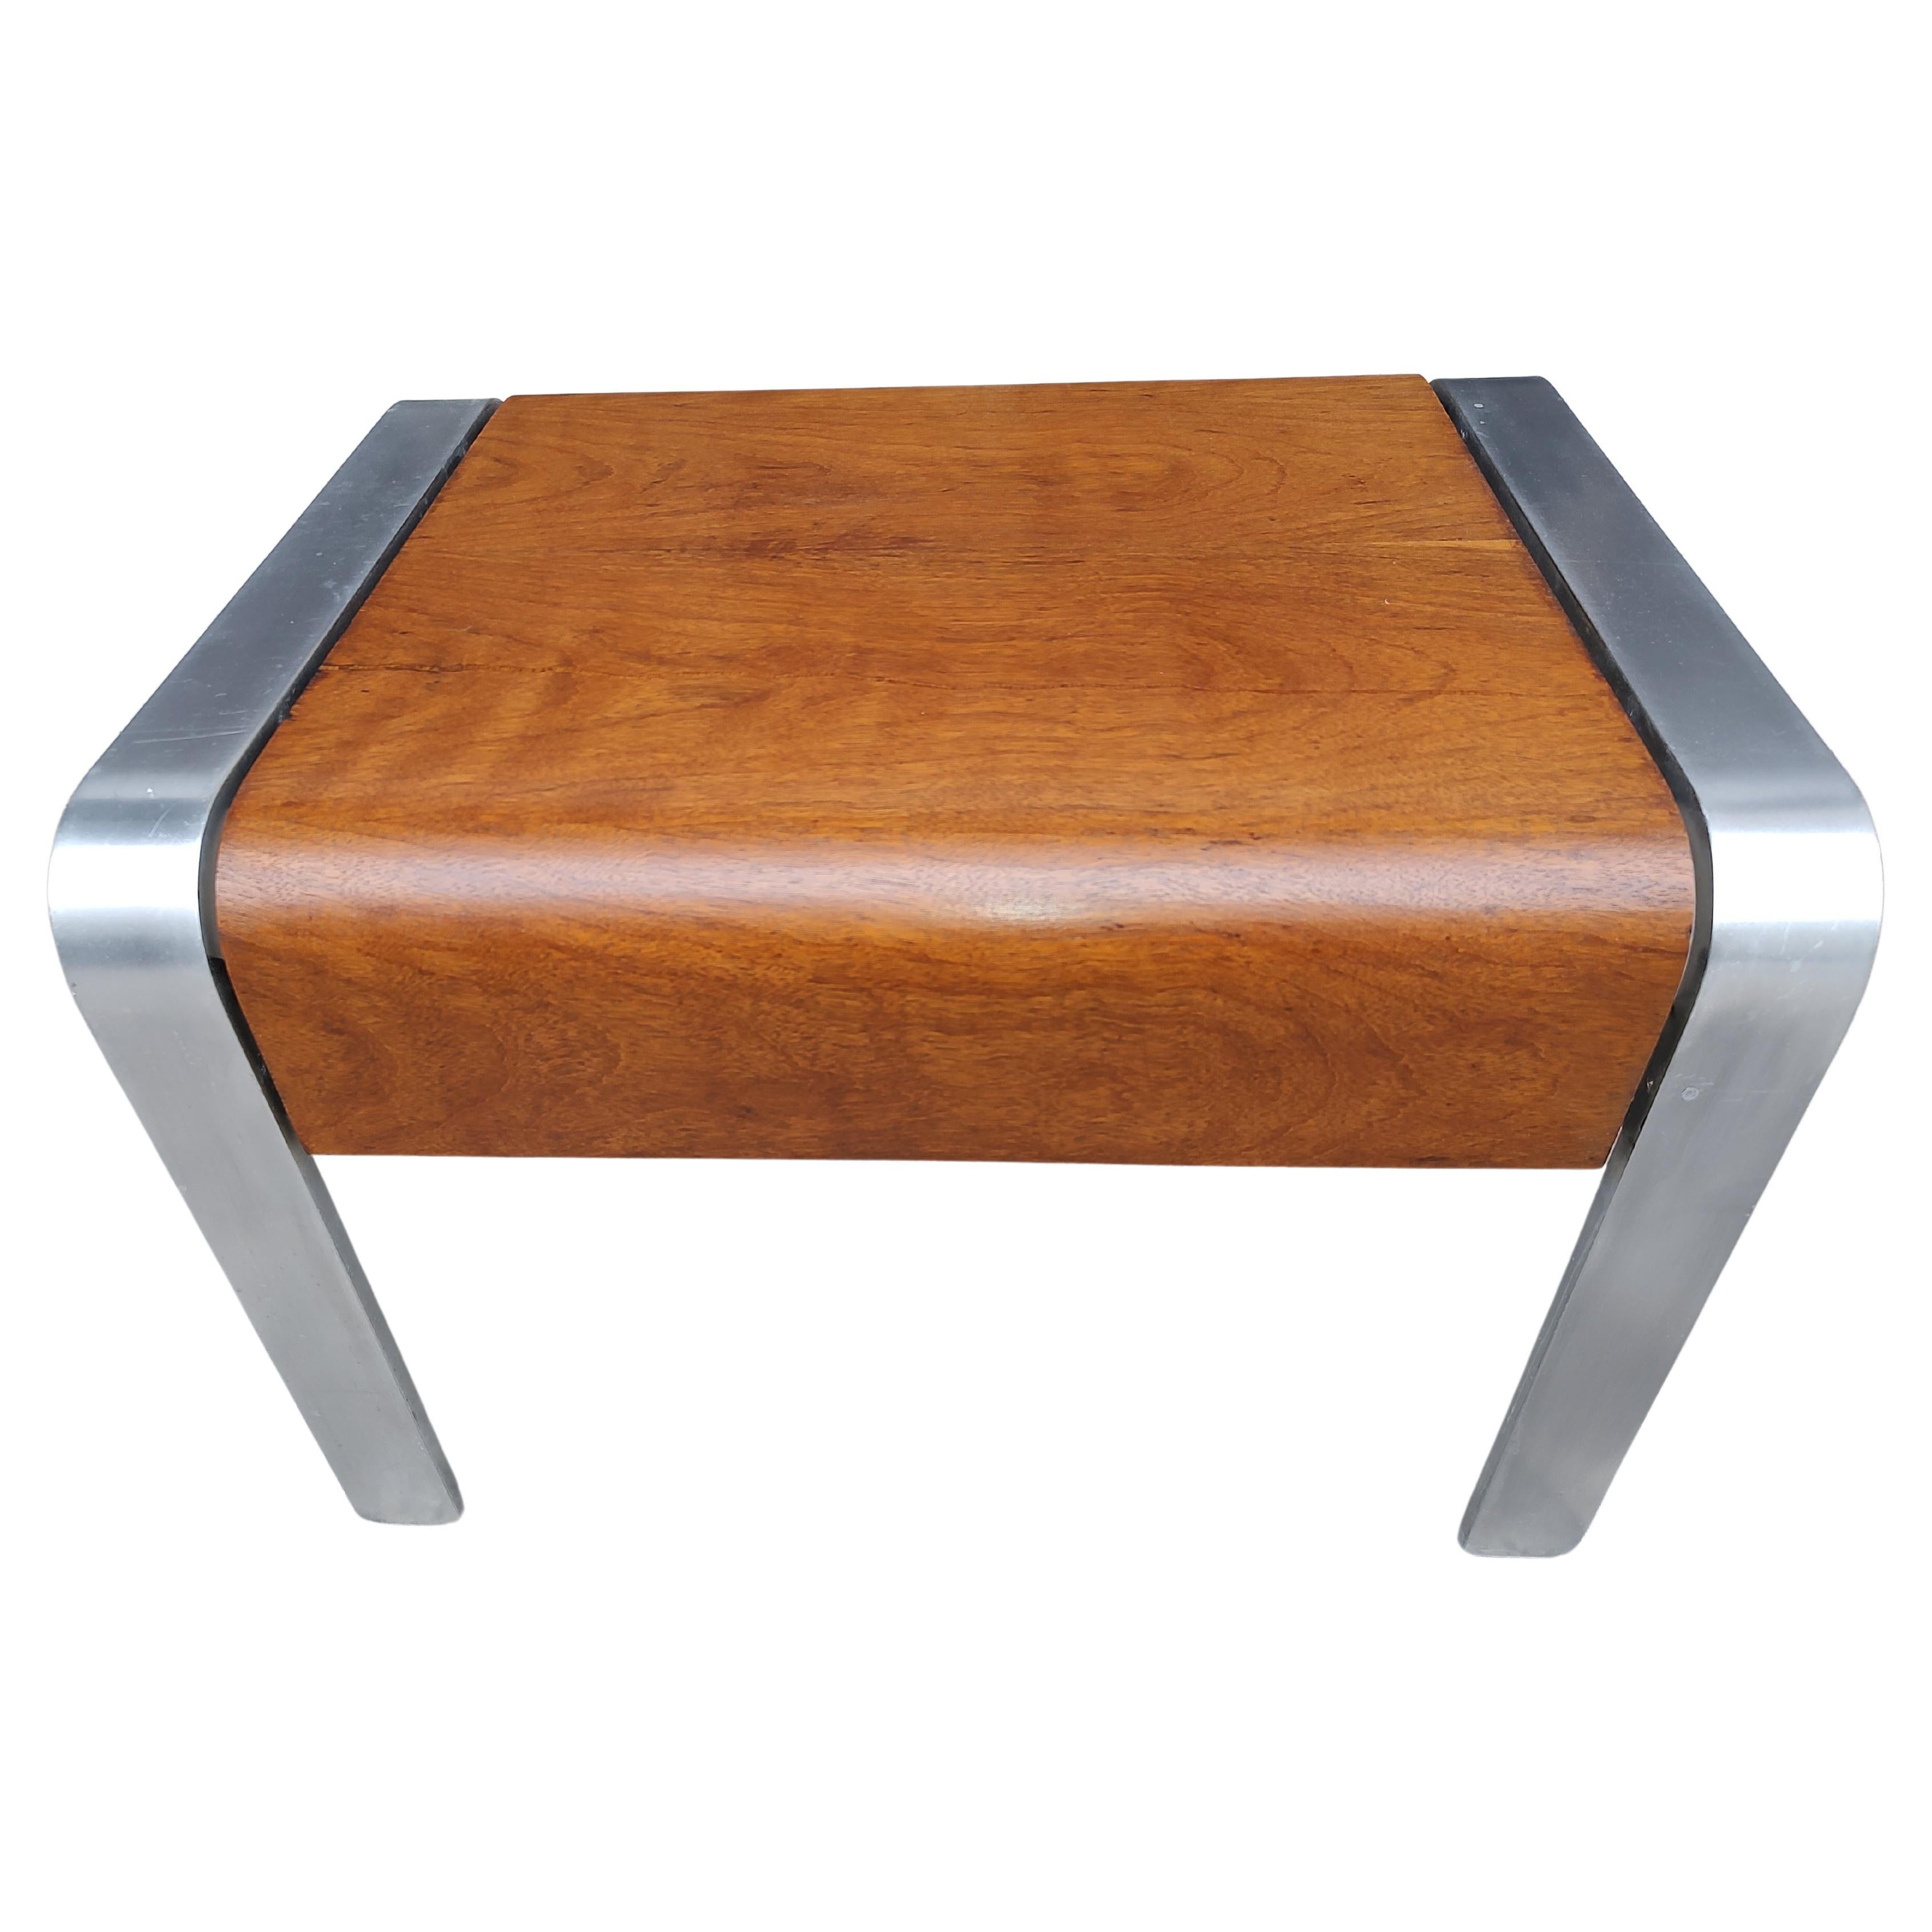 Modernist Aluminum Side Table with a Exotic Bent Wood Table Top For Sale